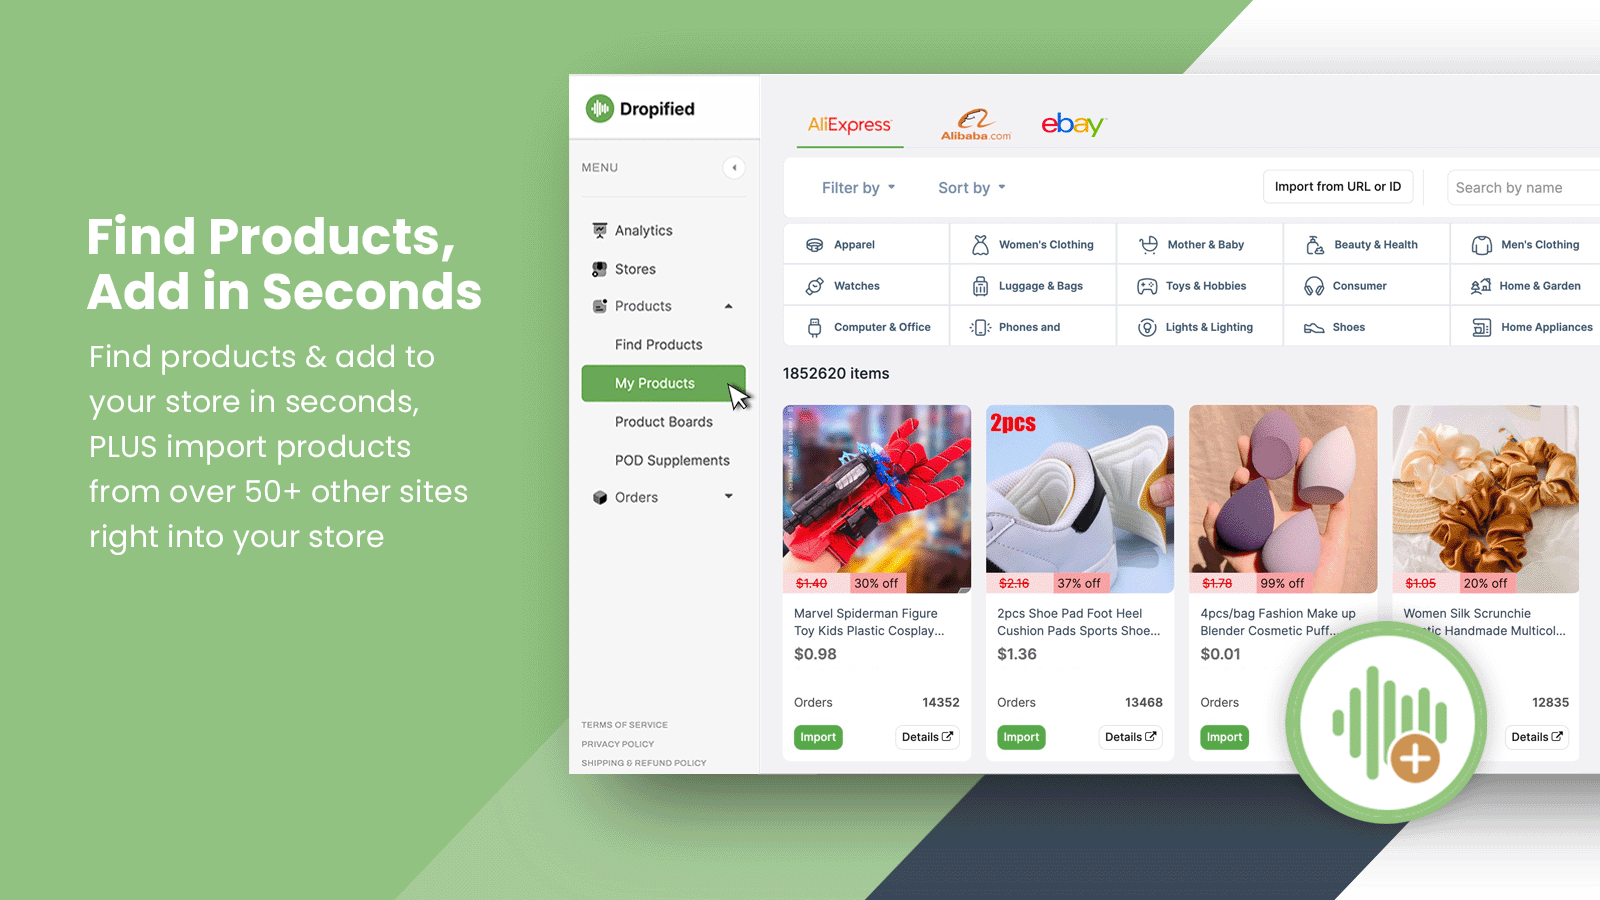 Easily Find Dropshipping Products & add to your store in seconds